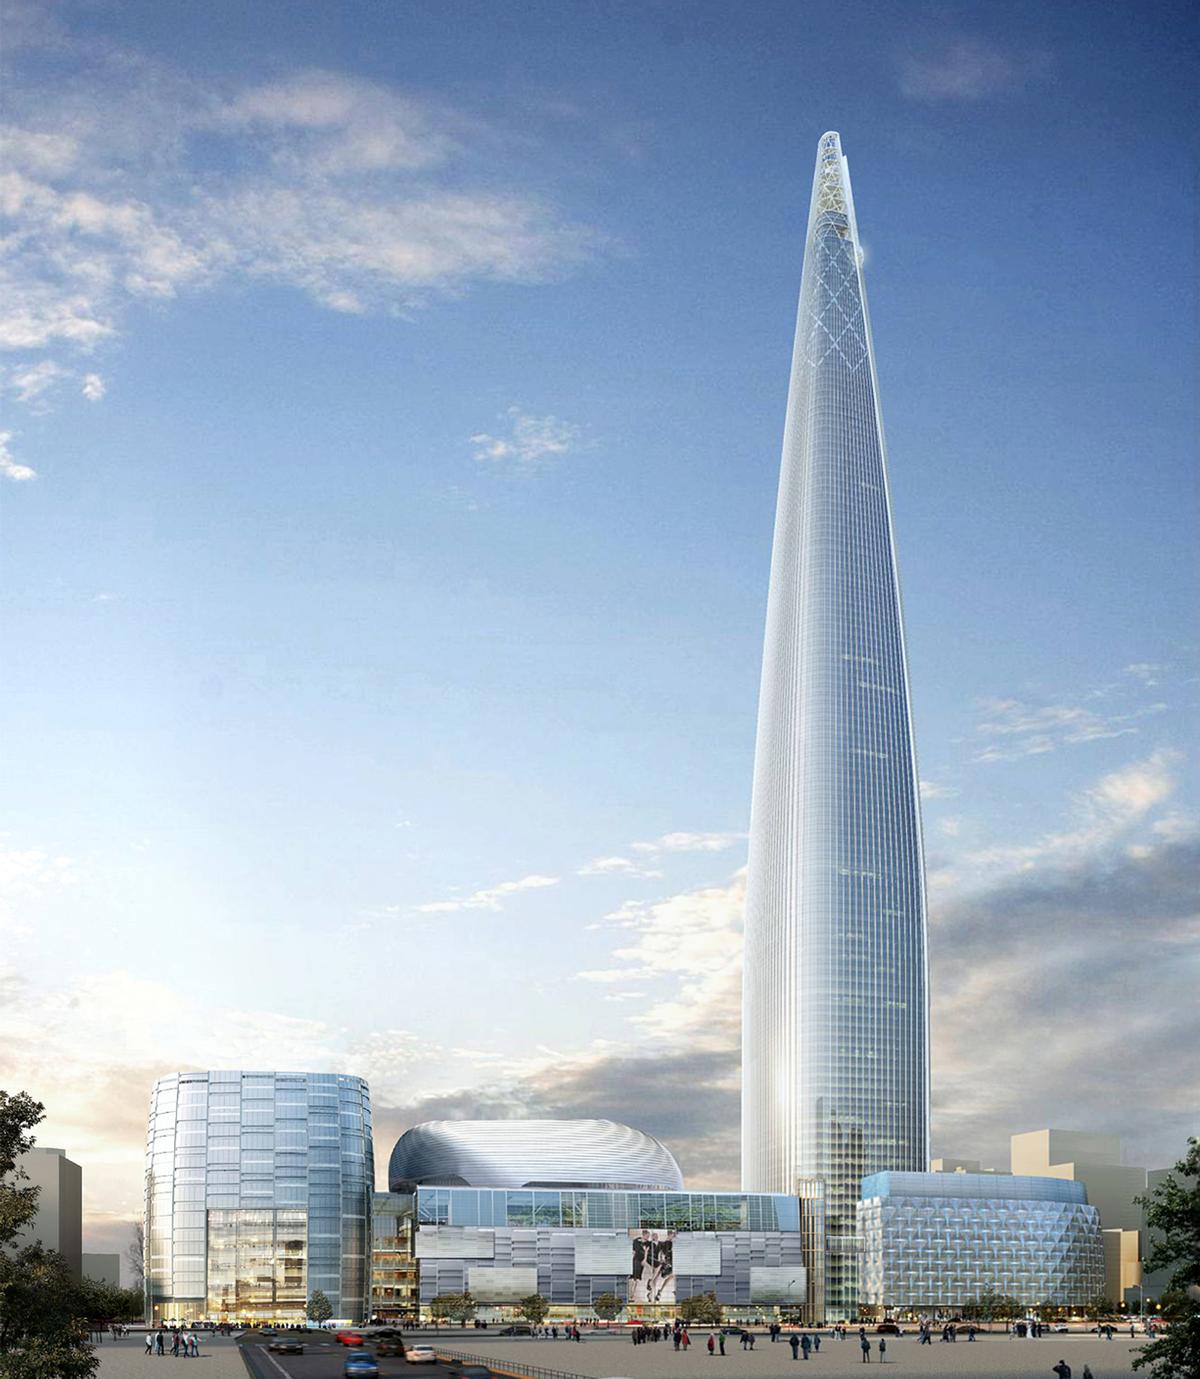 Designed by Kohn Pedersen Fox Associates, the 123-storey tower will include department stores, cultural facilities, restaurants, residences, offices, and the first Signiel Hotel, a new luxury brand of Lotte Hotels / 